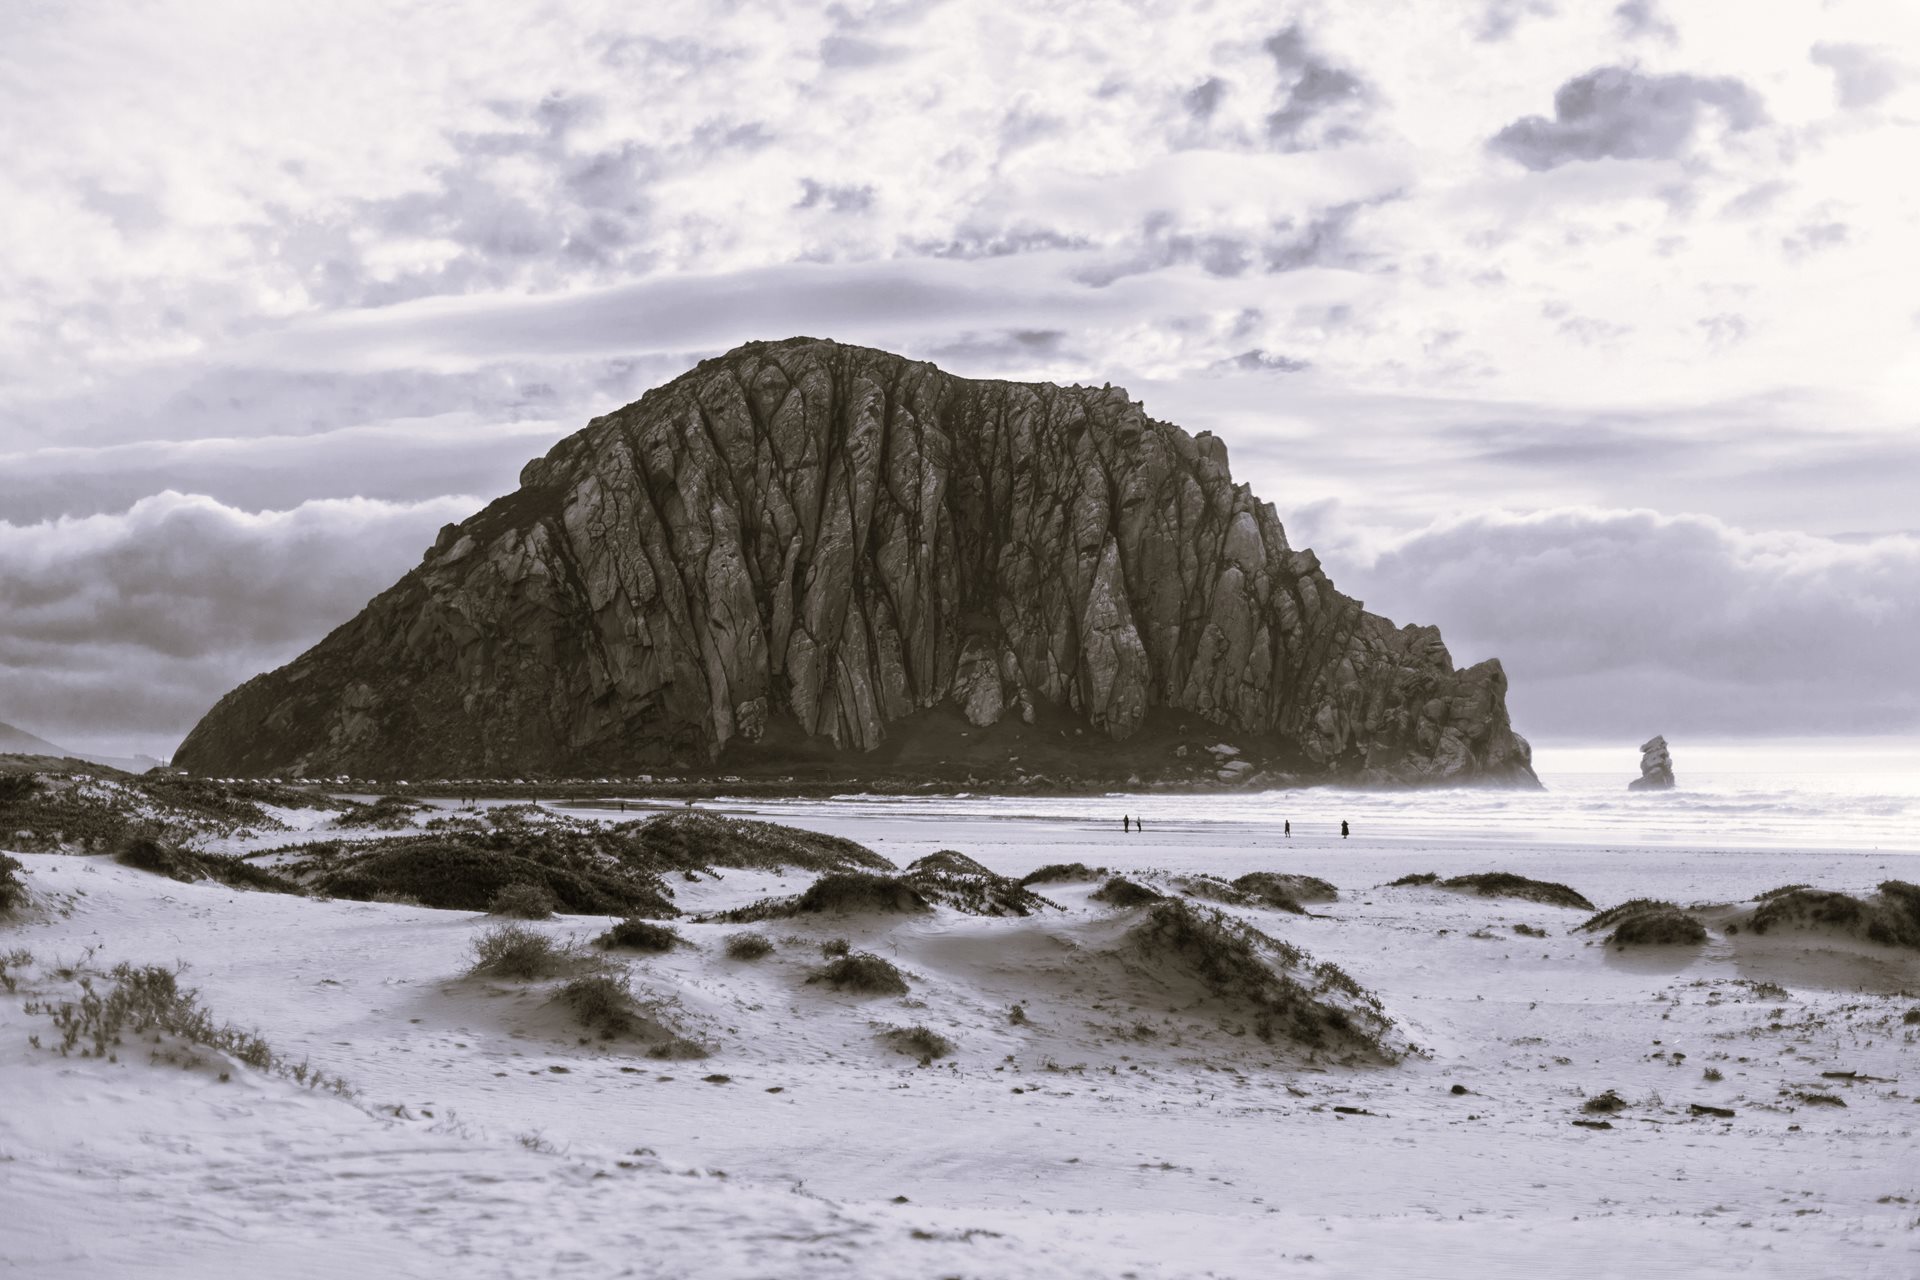 Picture of the Morro Bay Rock in black and white